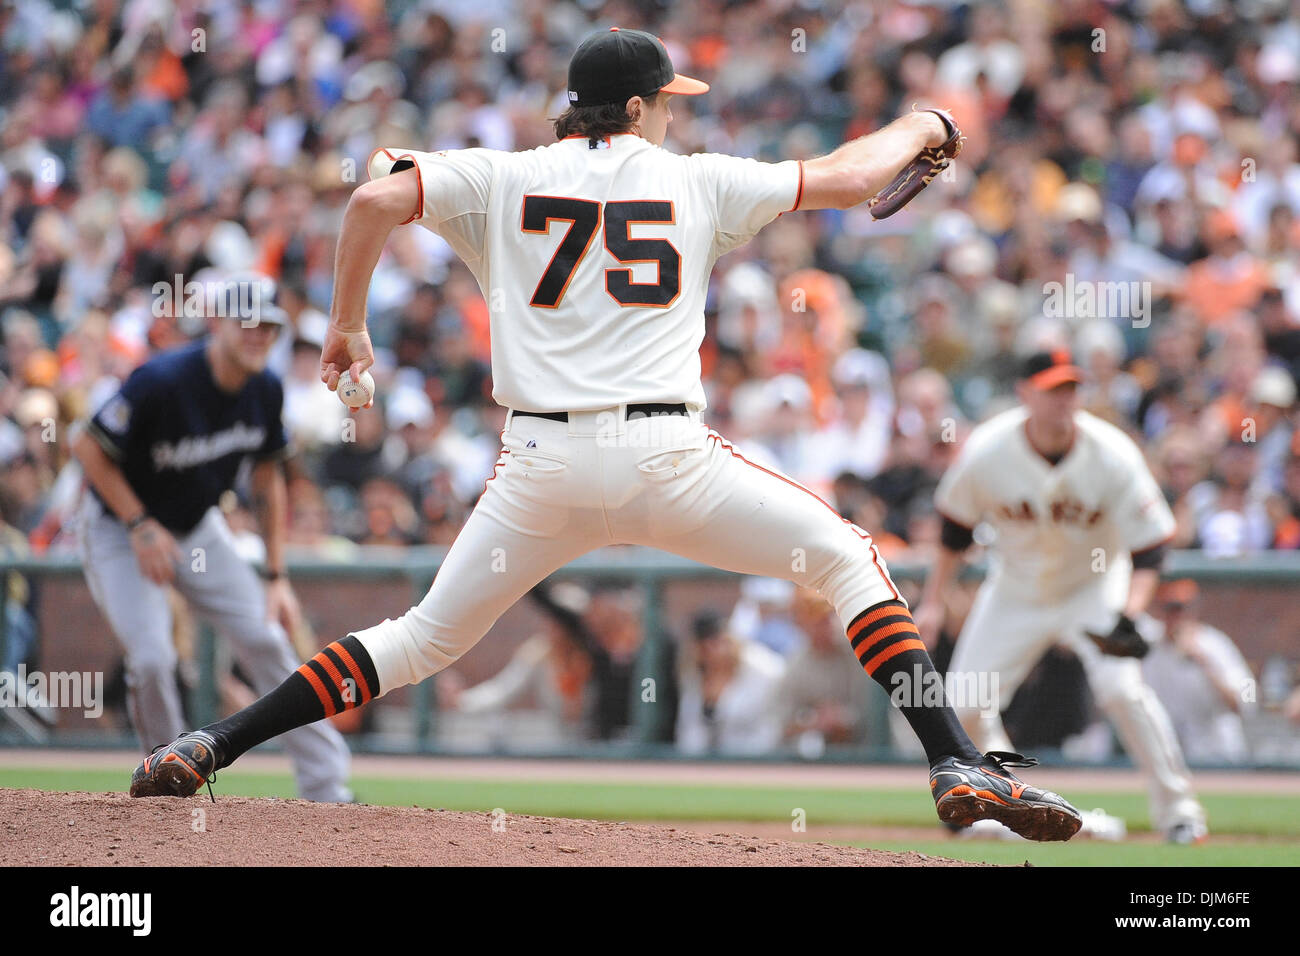 Sept. 19, 2010 - San Francisco, California, United States of America - San Francisco Giants pitcher Barry Zito (75) pitches the ball with a runner on first base. The San Francisco Giants defeated the Milwaukee Brewers 9-2. (Credit Image: © Charles Herskowitz/Southcreek Global/ZUMApress.com) Stock Photo